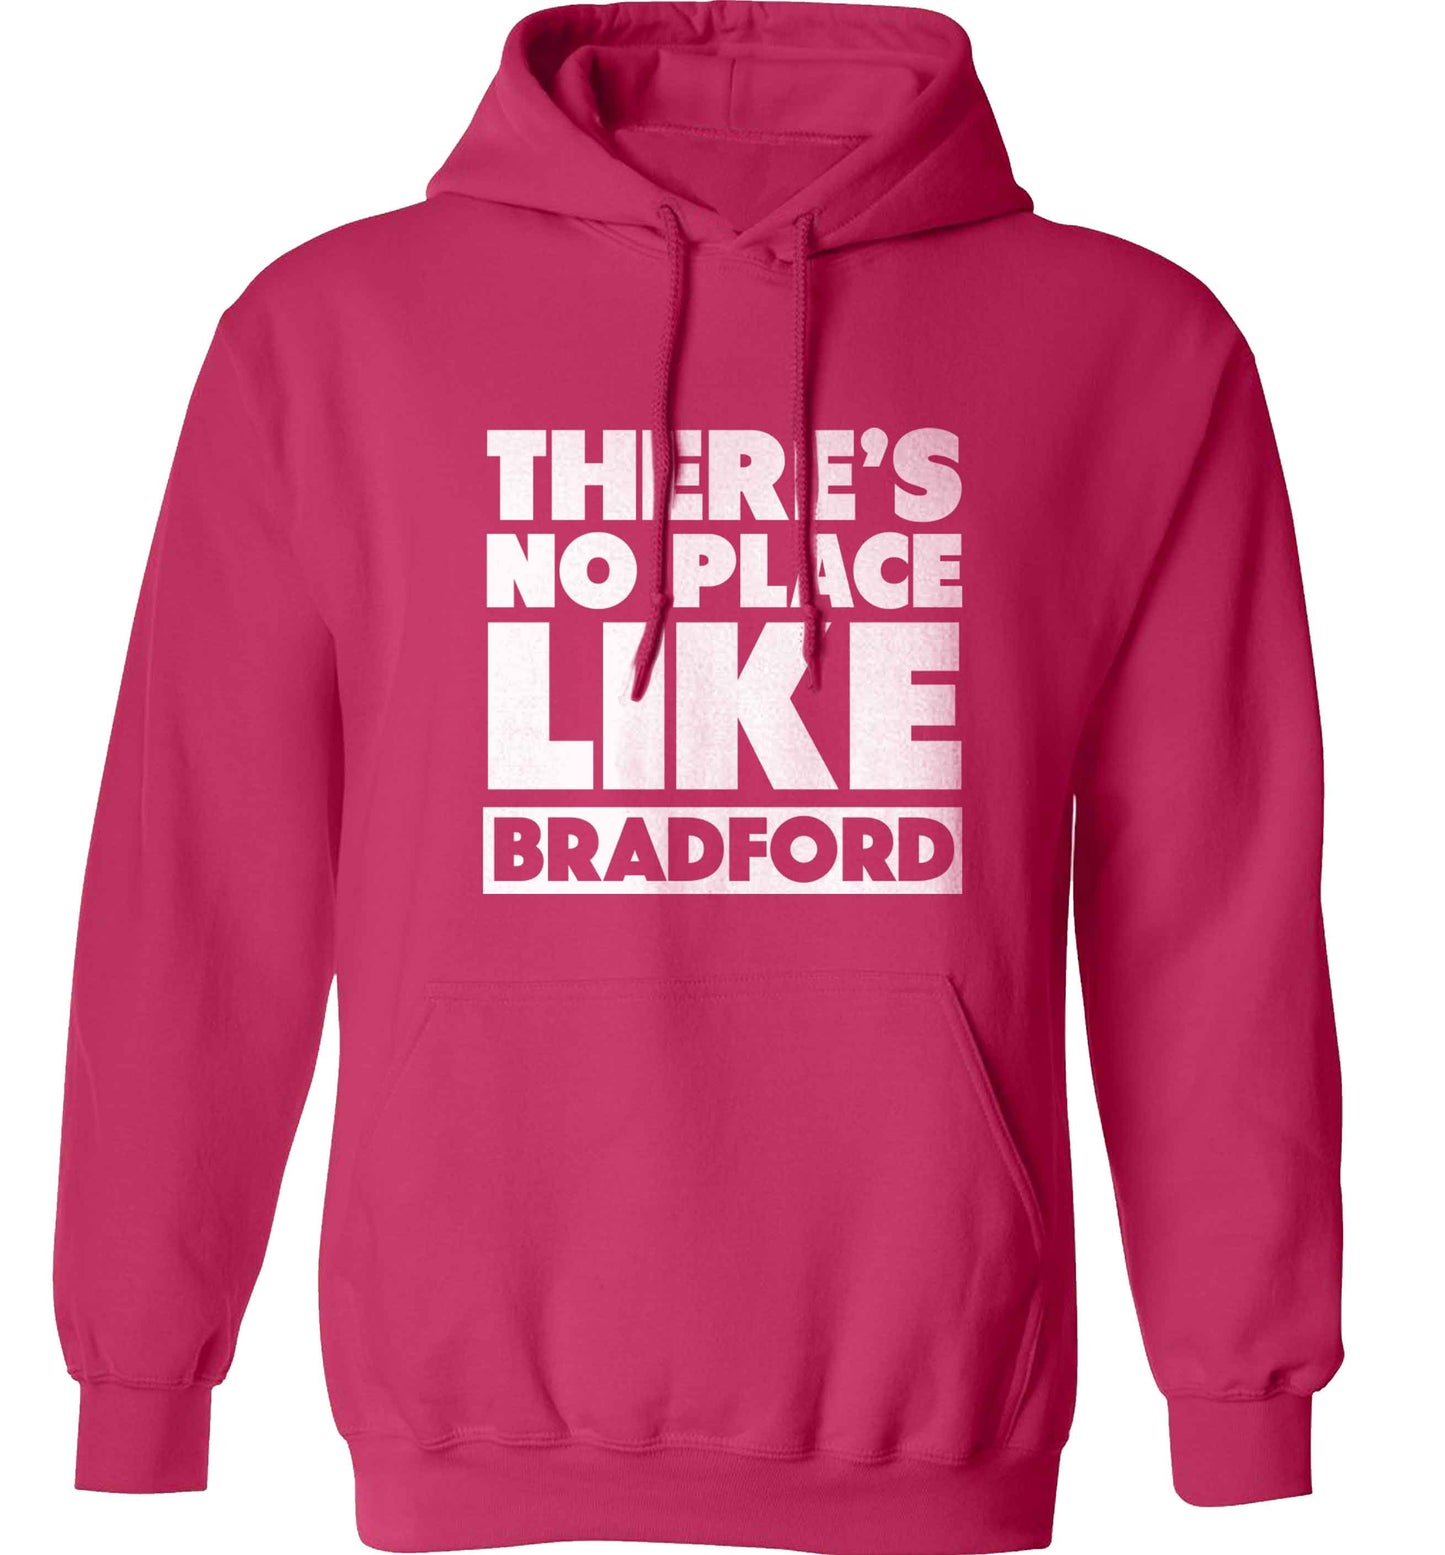 There's no place like Bradford adults unisex pink hoodie 2XL